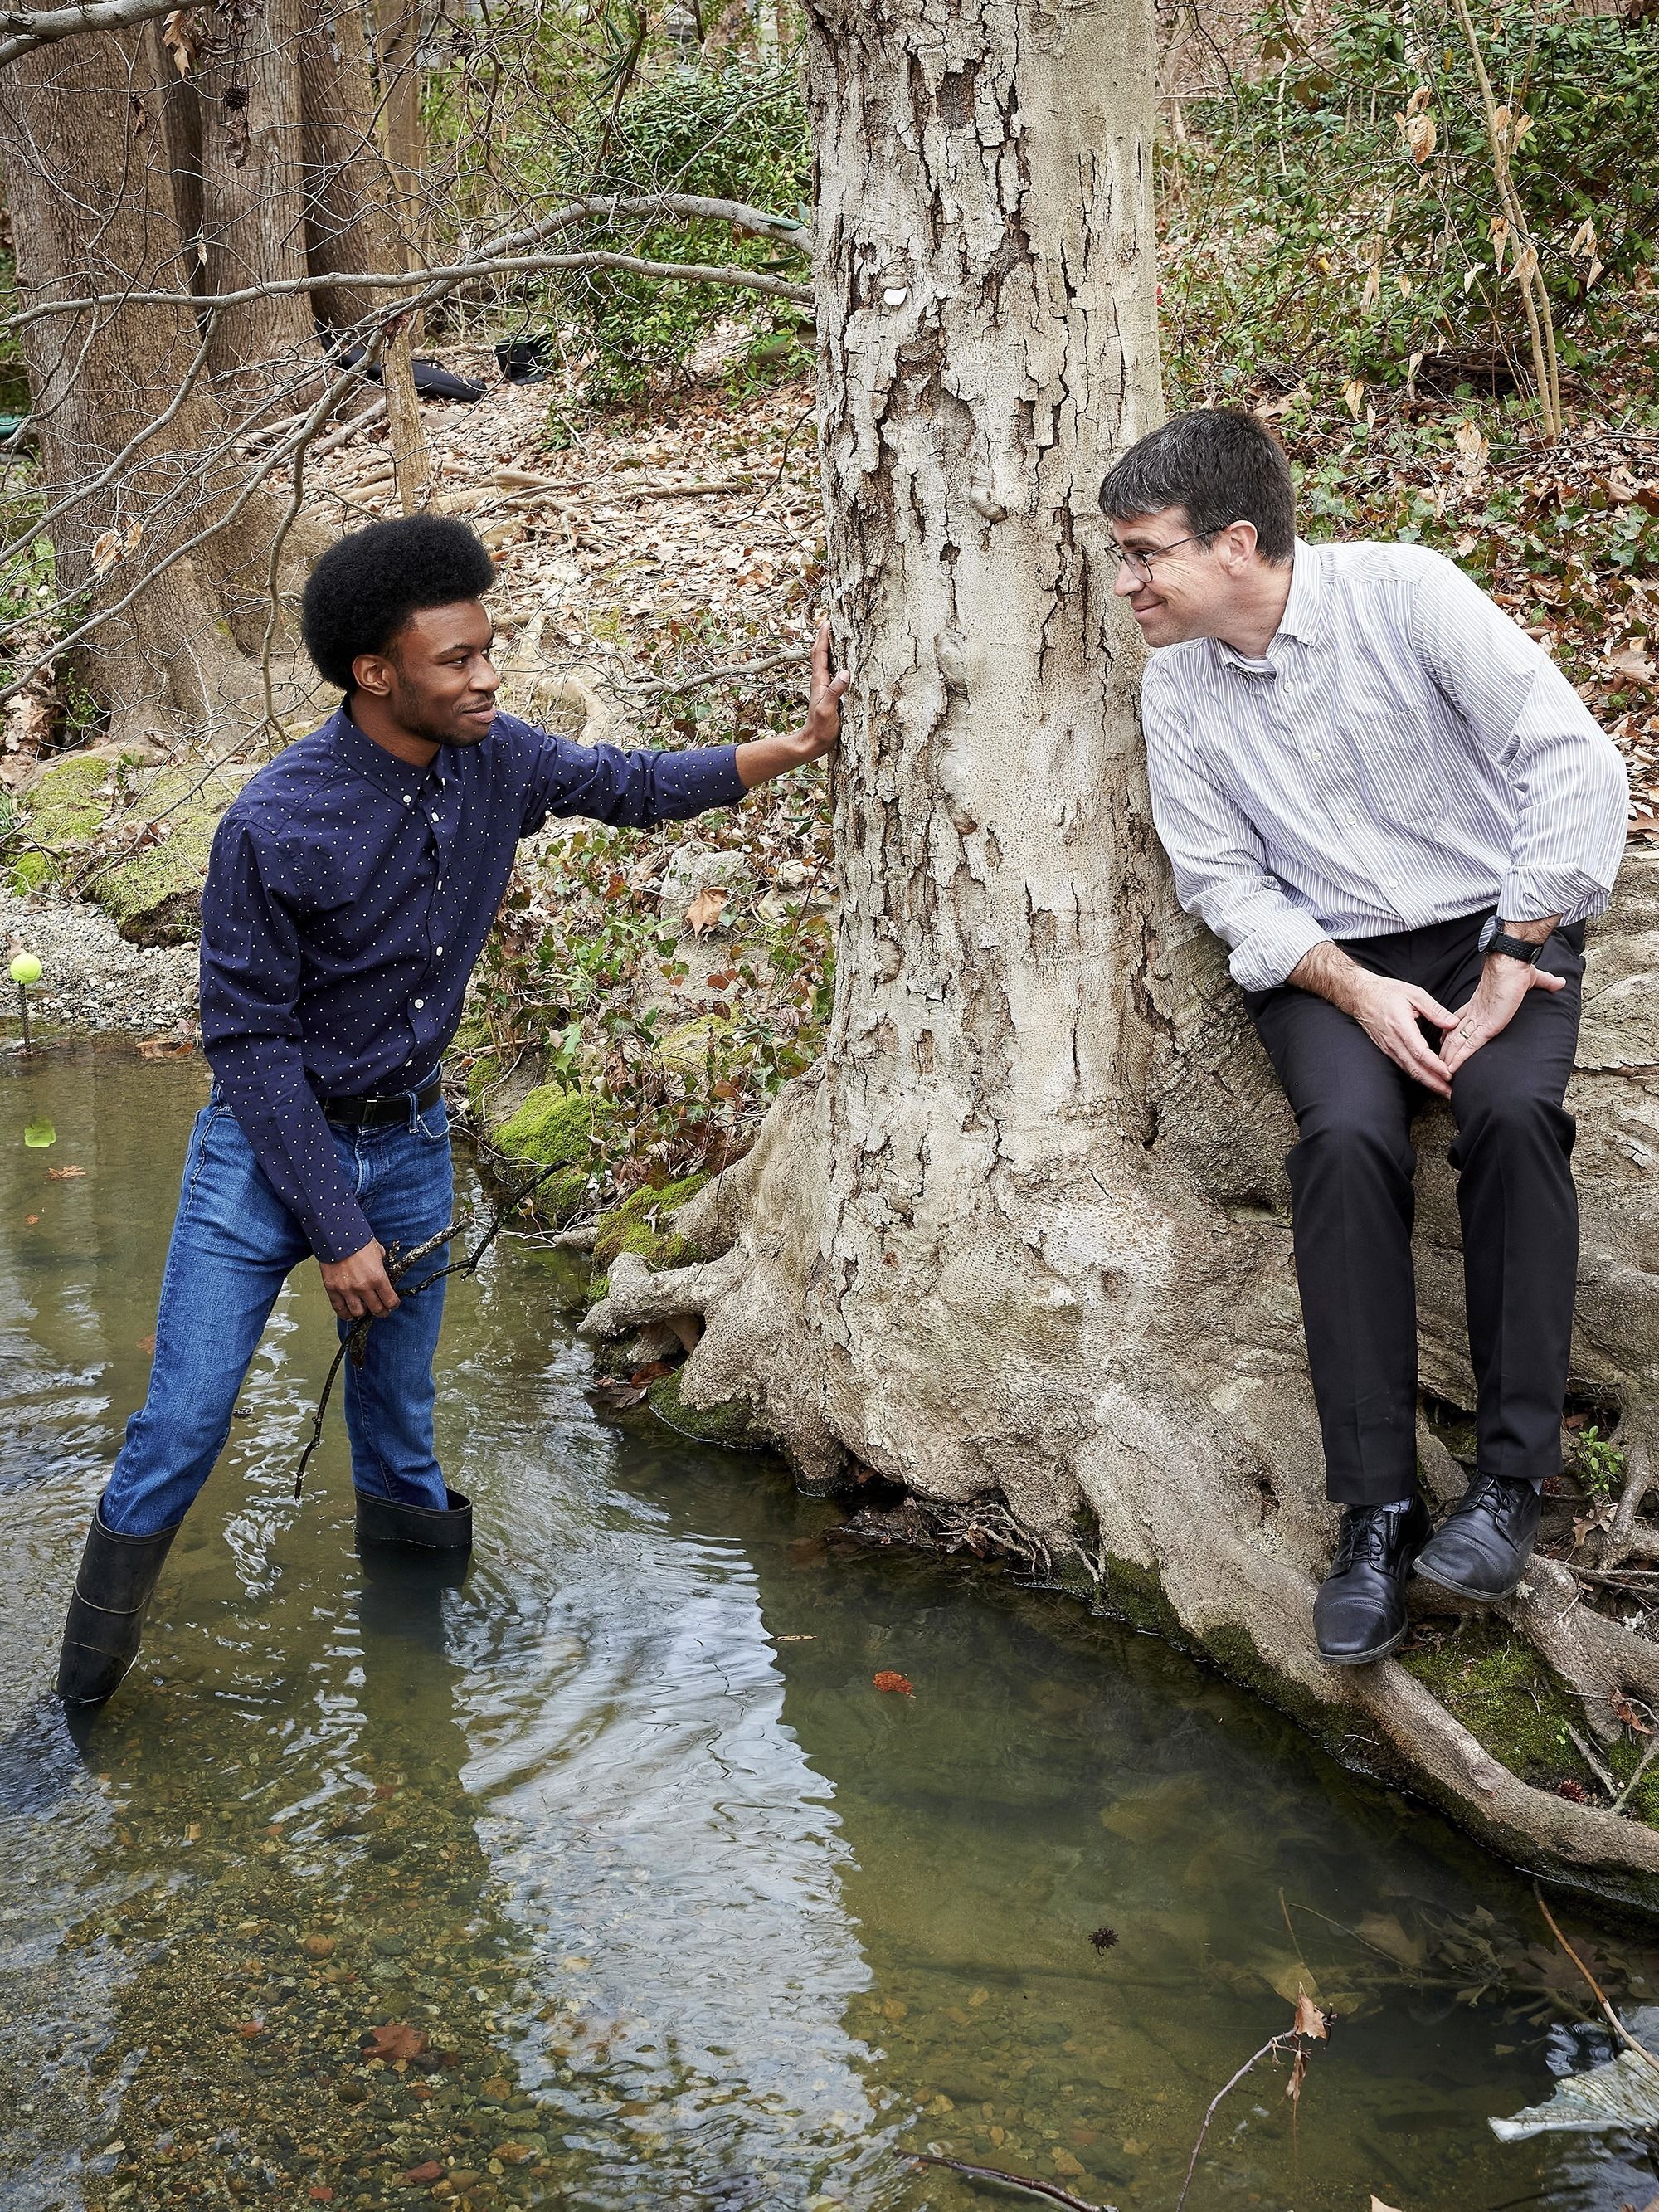 Chris Roberts, accompanied by faculty mentor Chris Oberlies, wades into a stream looking for fungal samples.